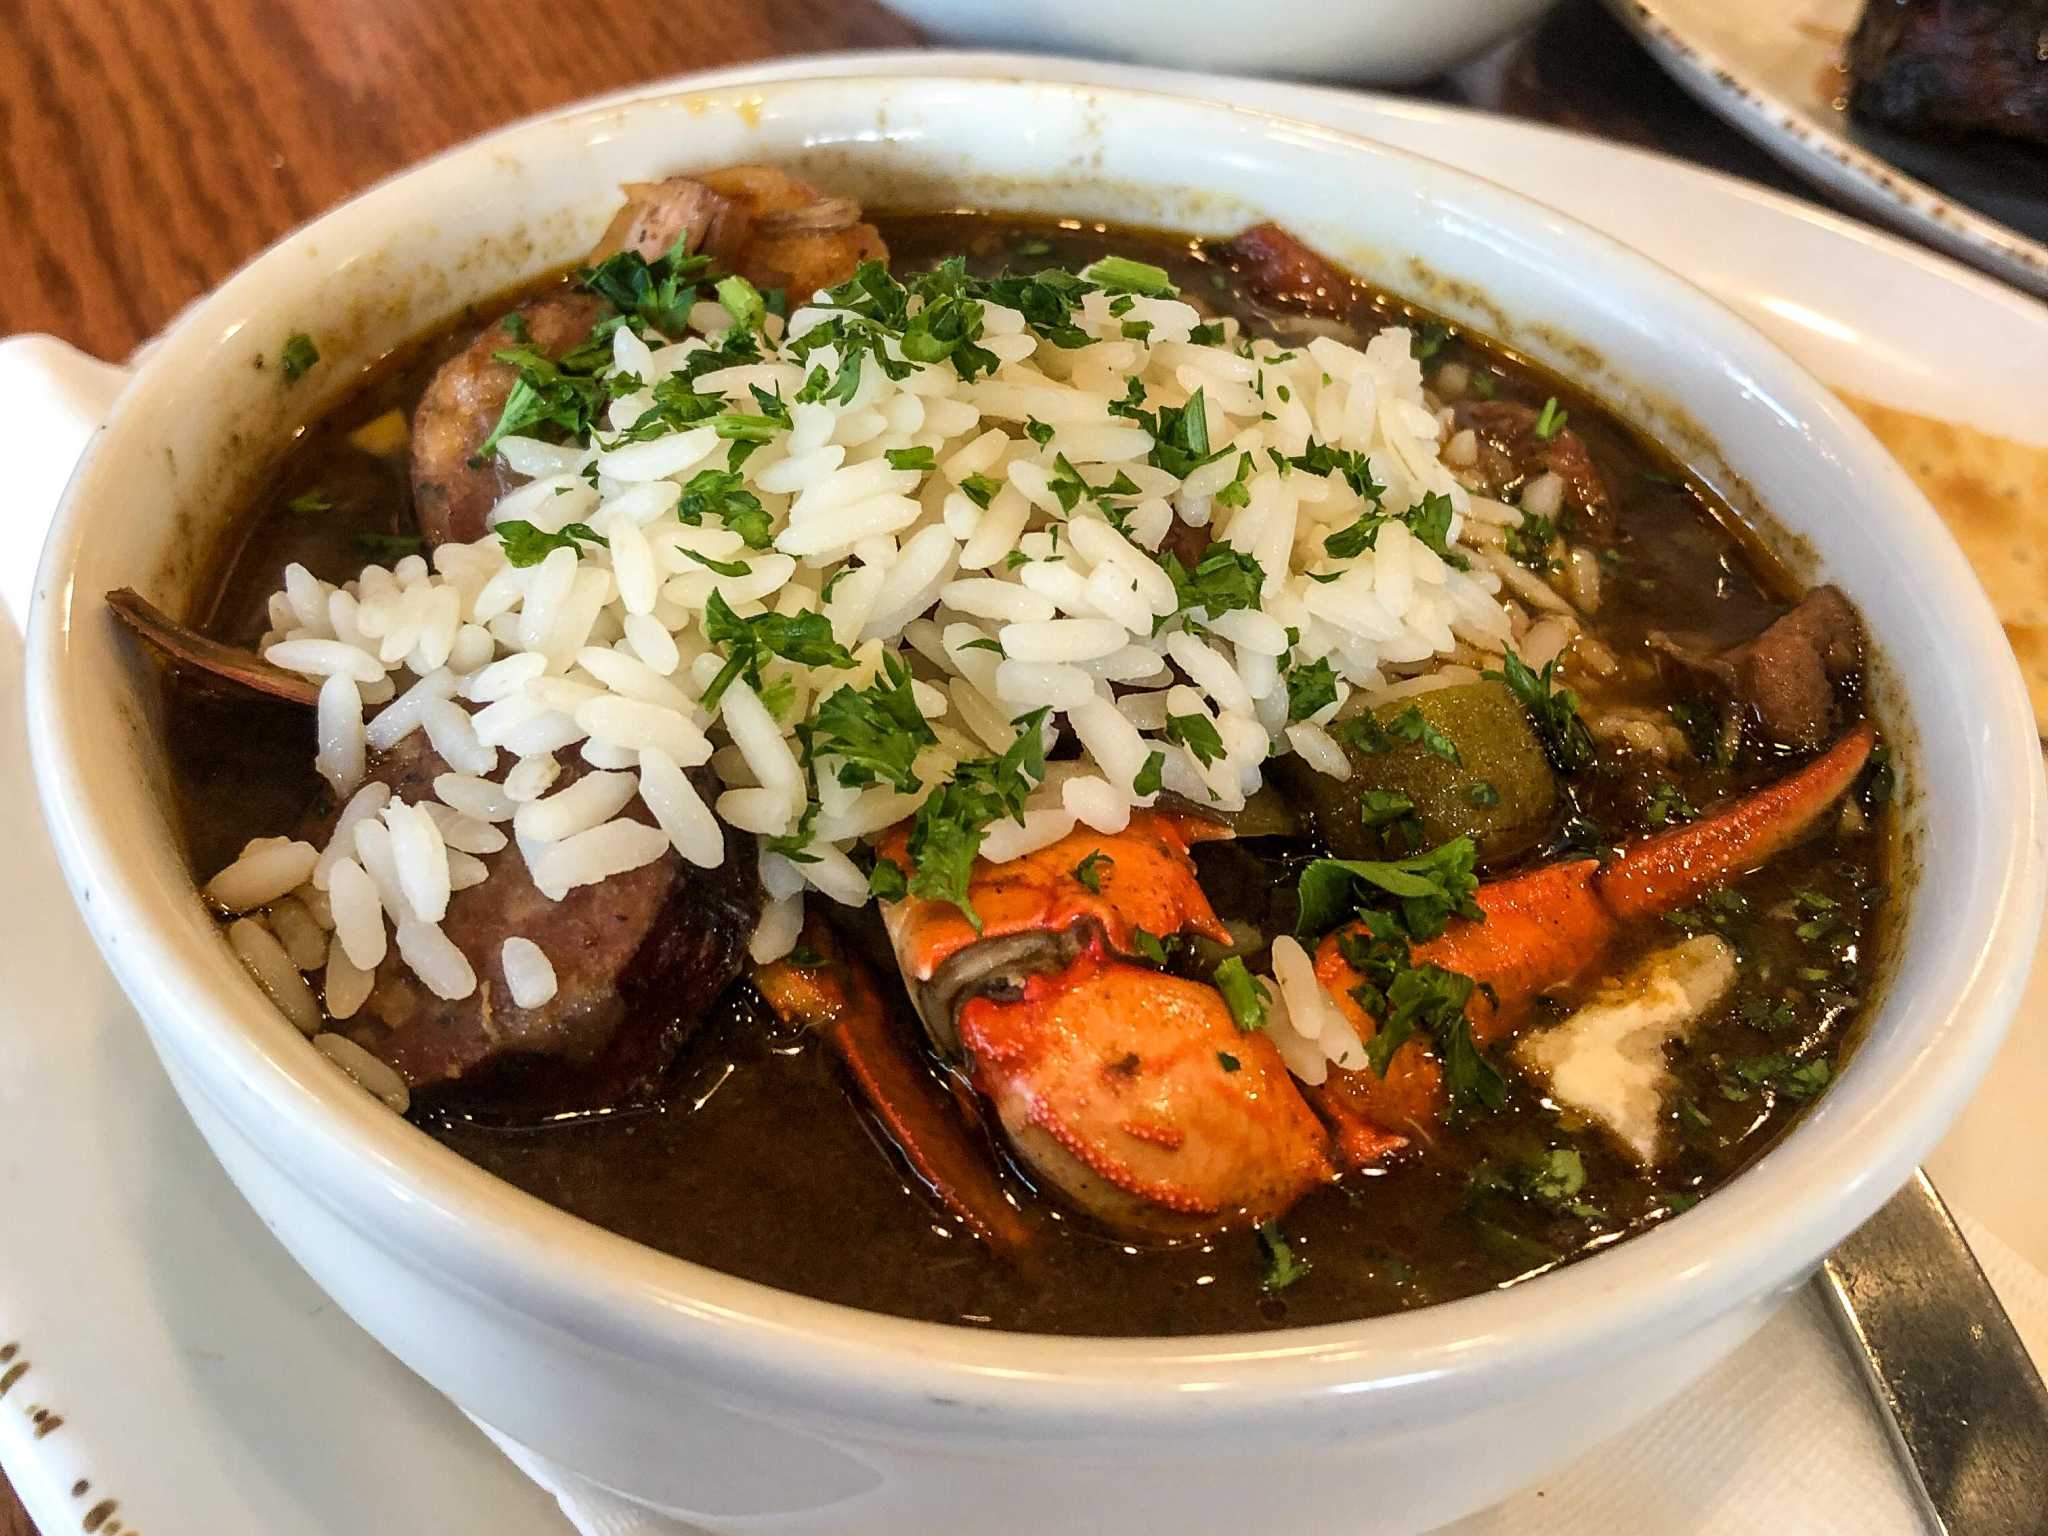 Houston barbecue joints offer gumbo on the menu - Houston Chronicle